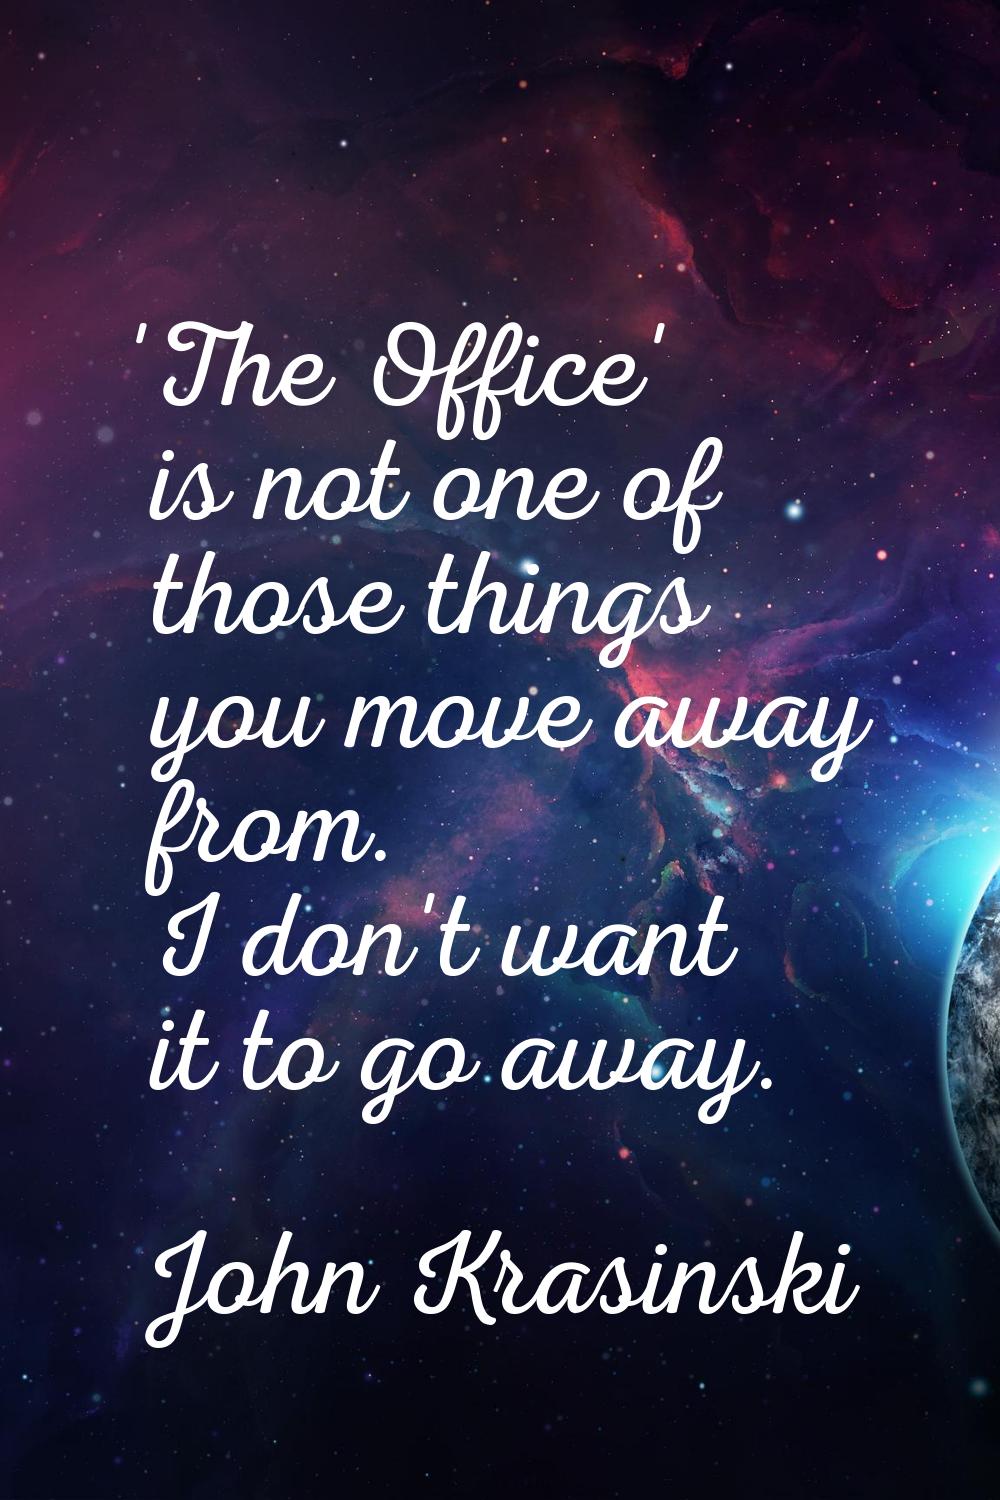 'The Office' is not one of those things you move away from. I don't want it to go away.